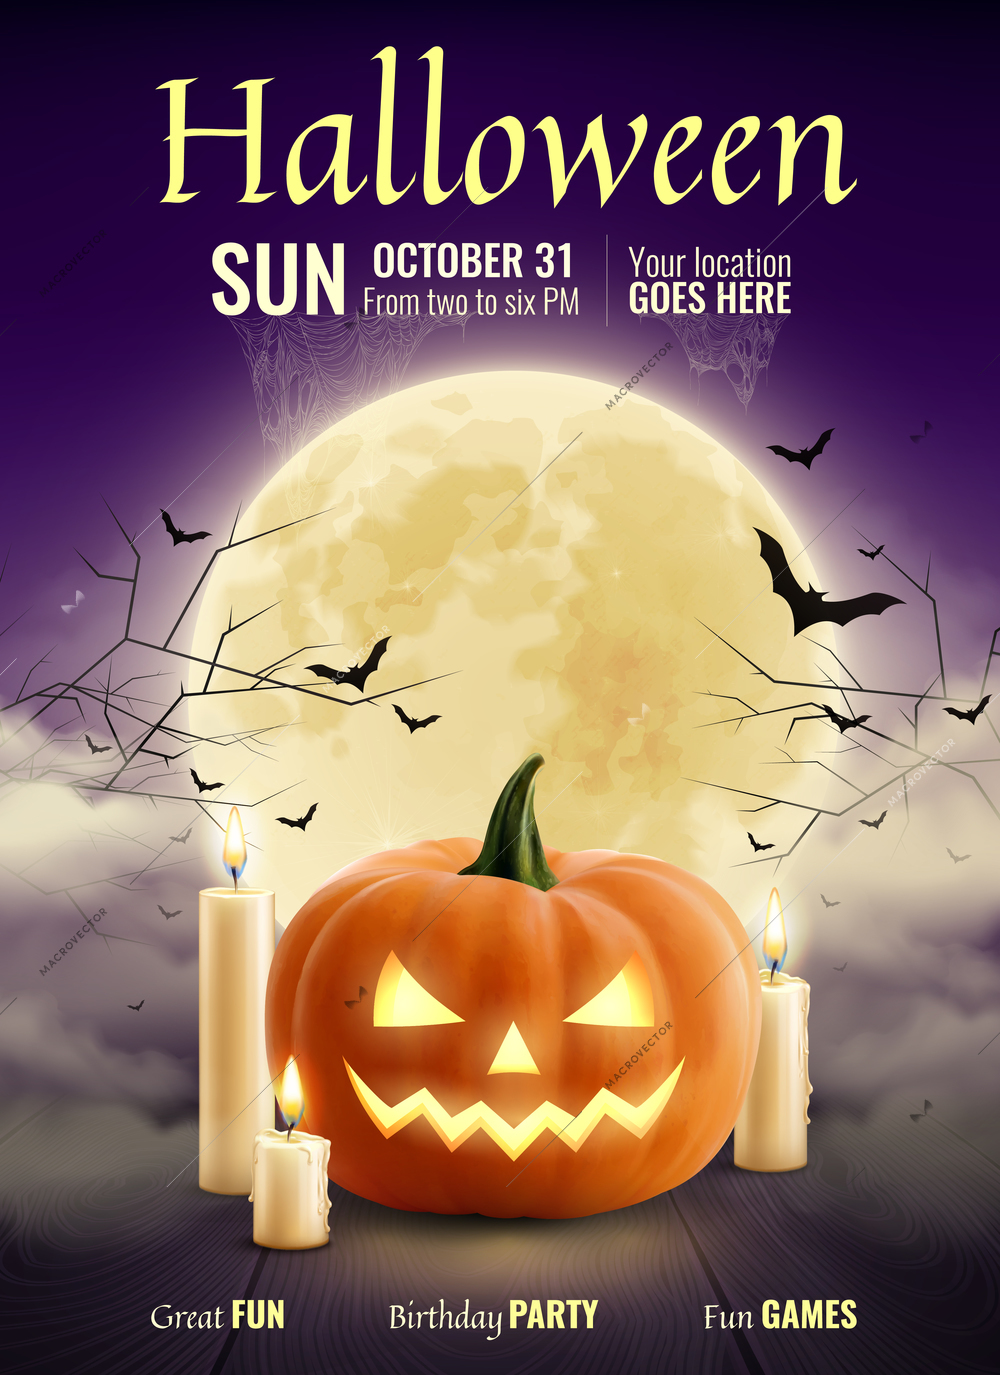 Halloween party realistic poster with pumpkin candles big glowing moon ball on night sparkle sky and bats vector illustration